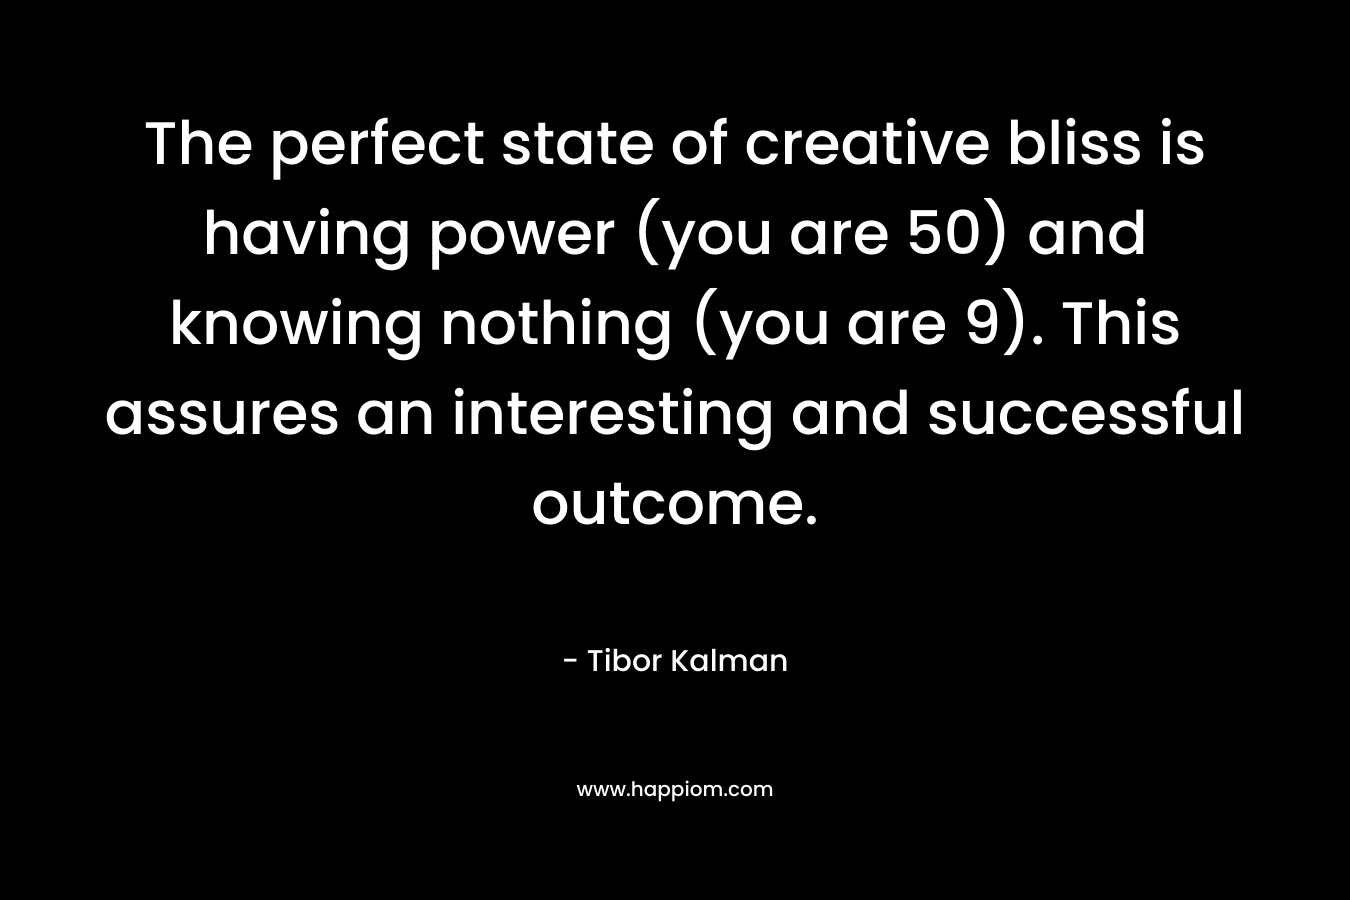 The perfect state of creative bliss is having power (you are 50) and knowing nothing (you are 9). This assures an interesting and successful outcome.